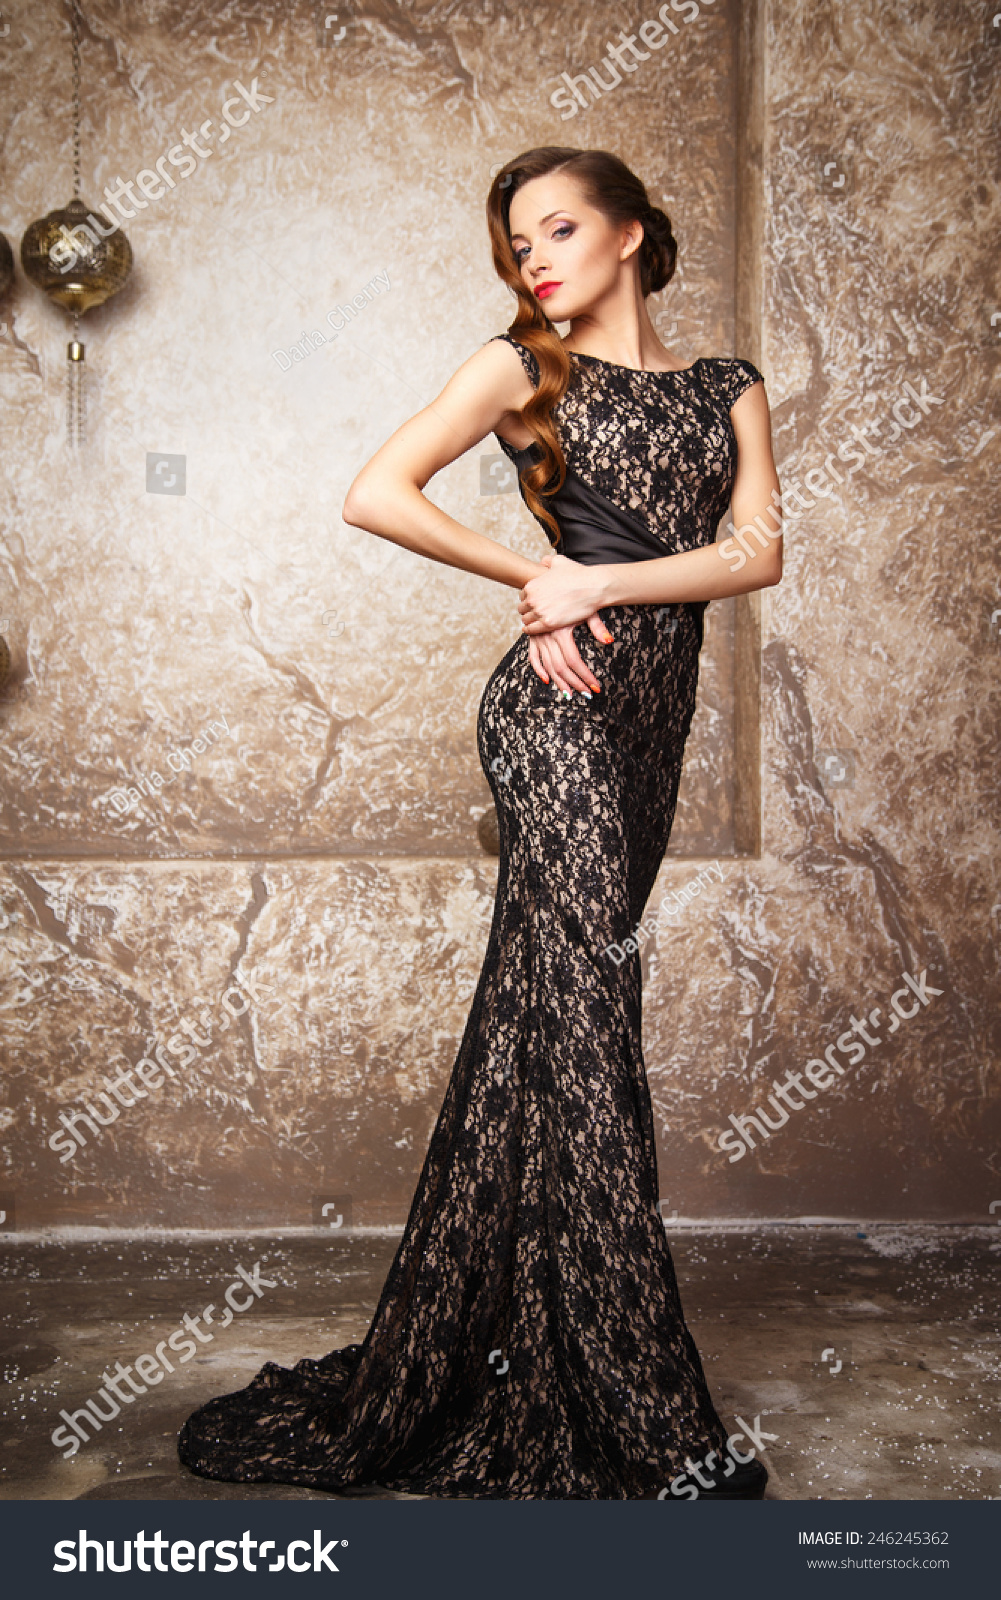 http://image.shutterstock.com/z/stock-photo-portrait-of-beautiful-elegant-young-woman-in-gorgeous-evening-dress-246245362.jpg